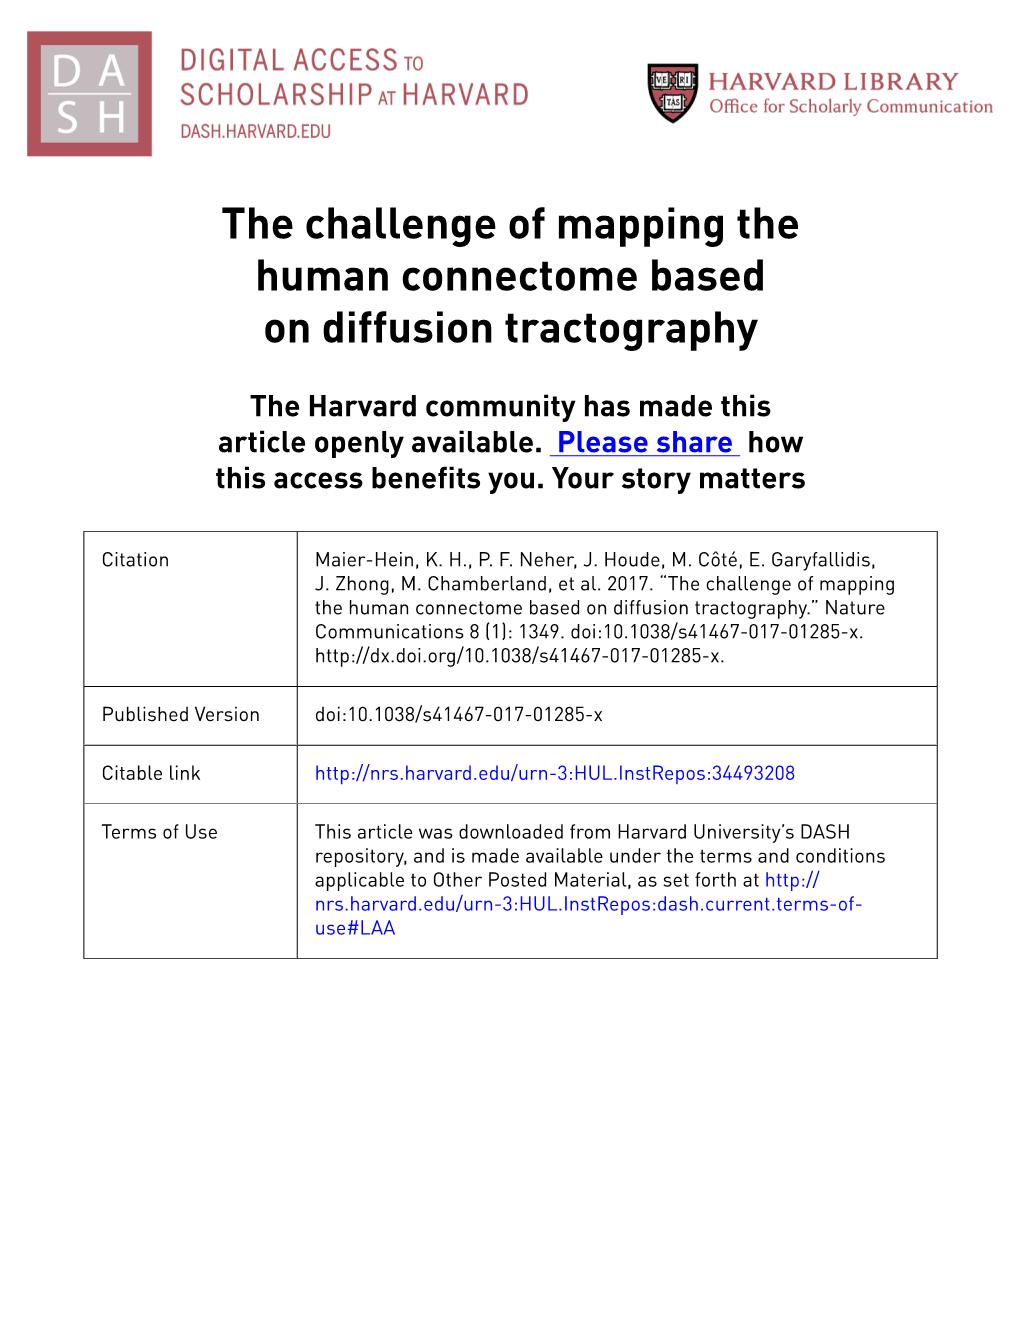 The Challenge of Mapping the Human Connectome Based on Diffusion Tractography